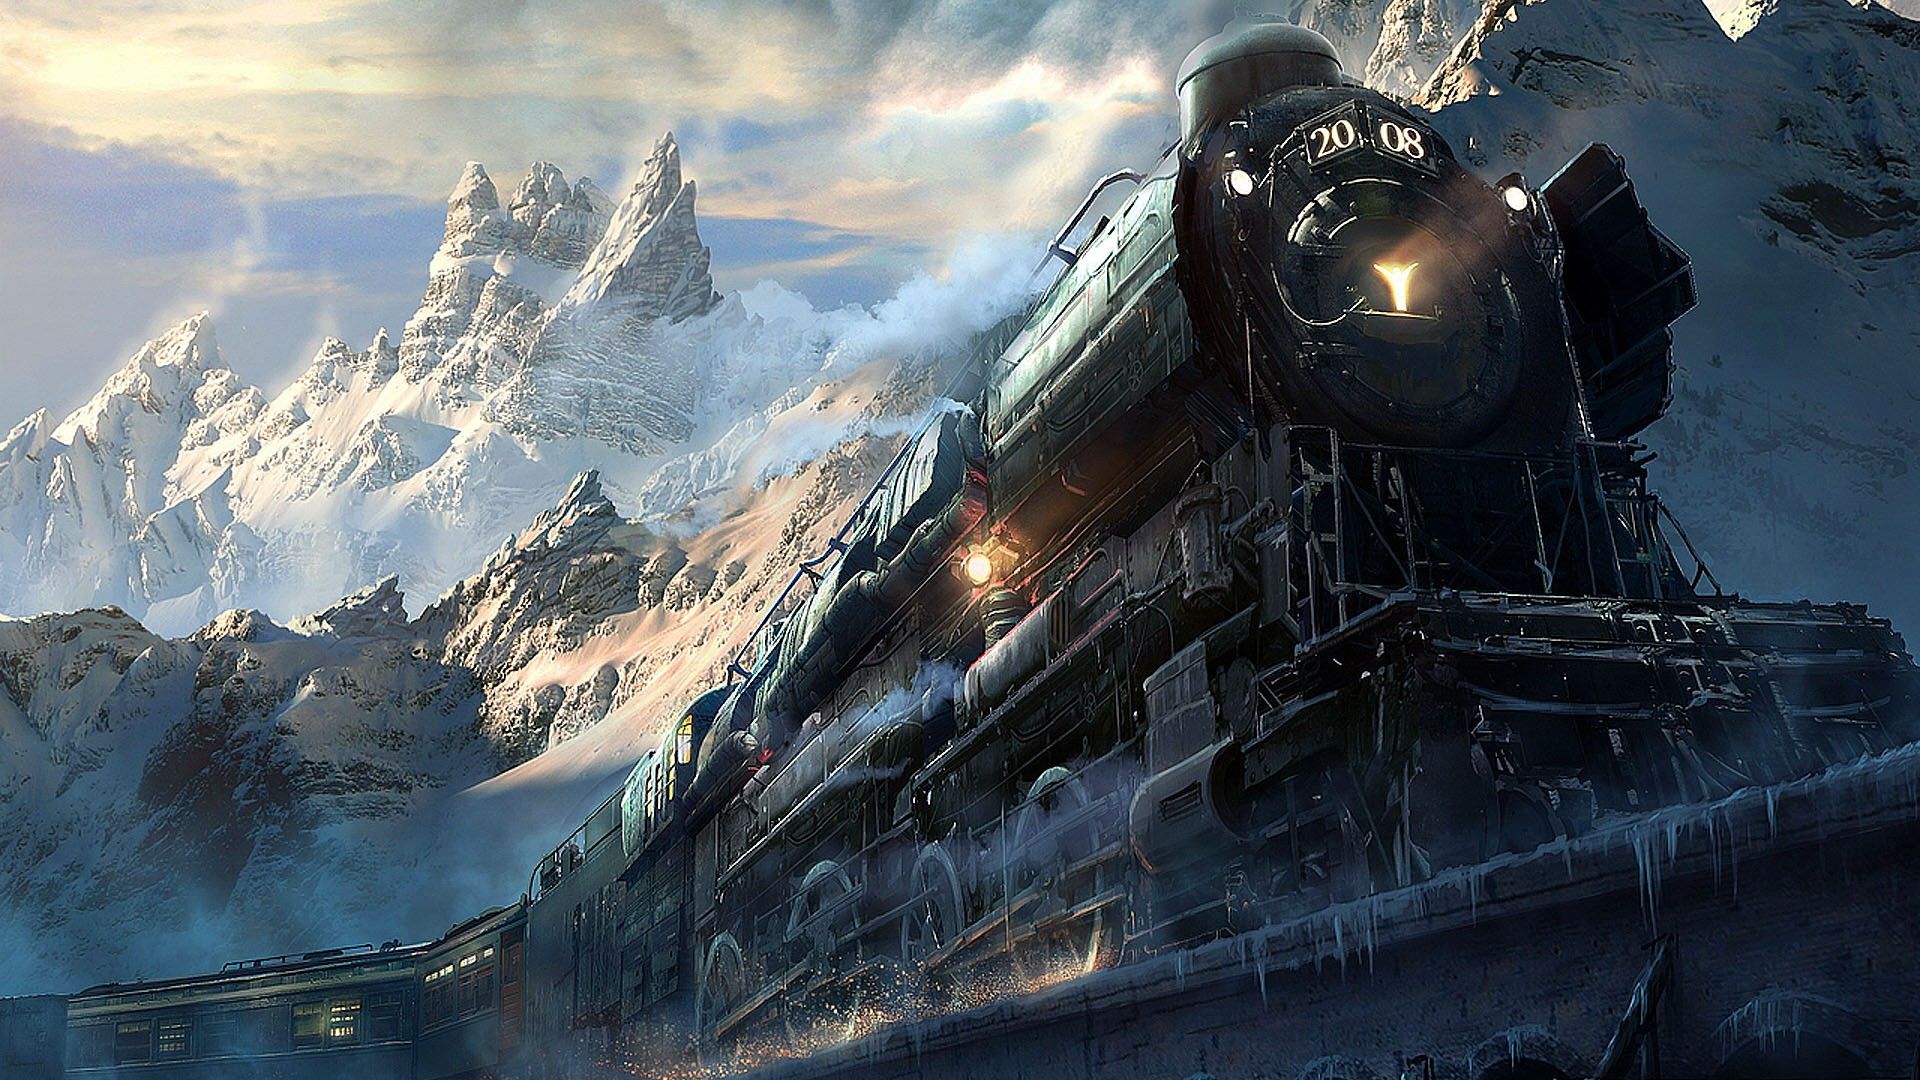 25 Collection Of Beautiful Train Wallpapers DesignTrends